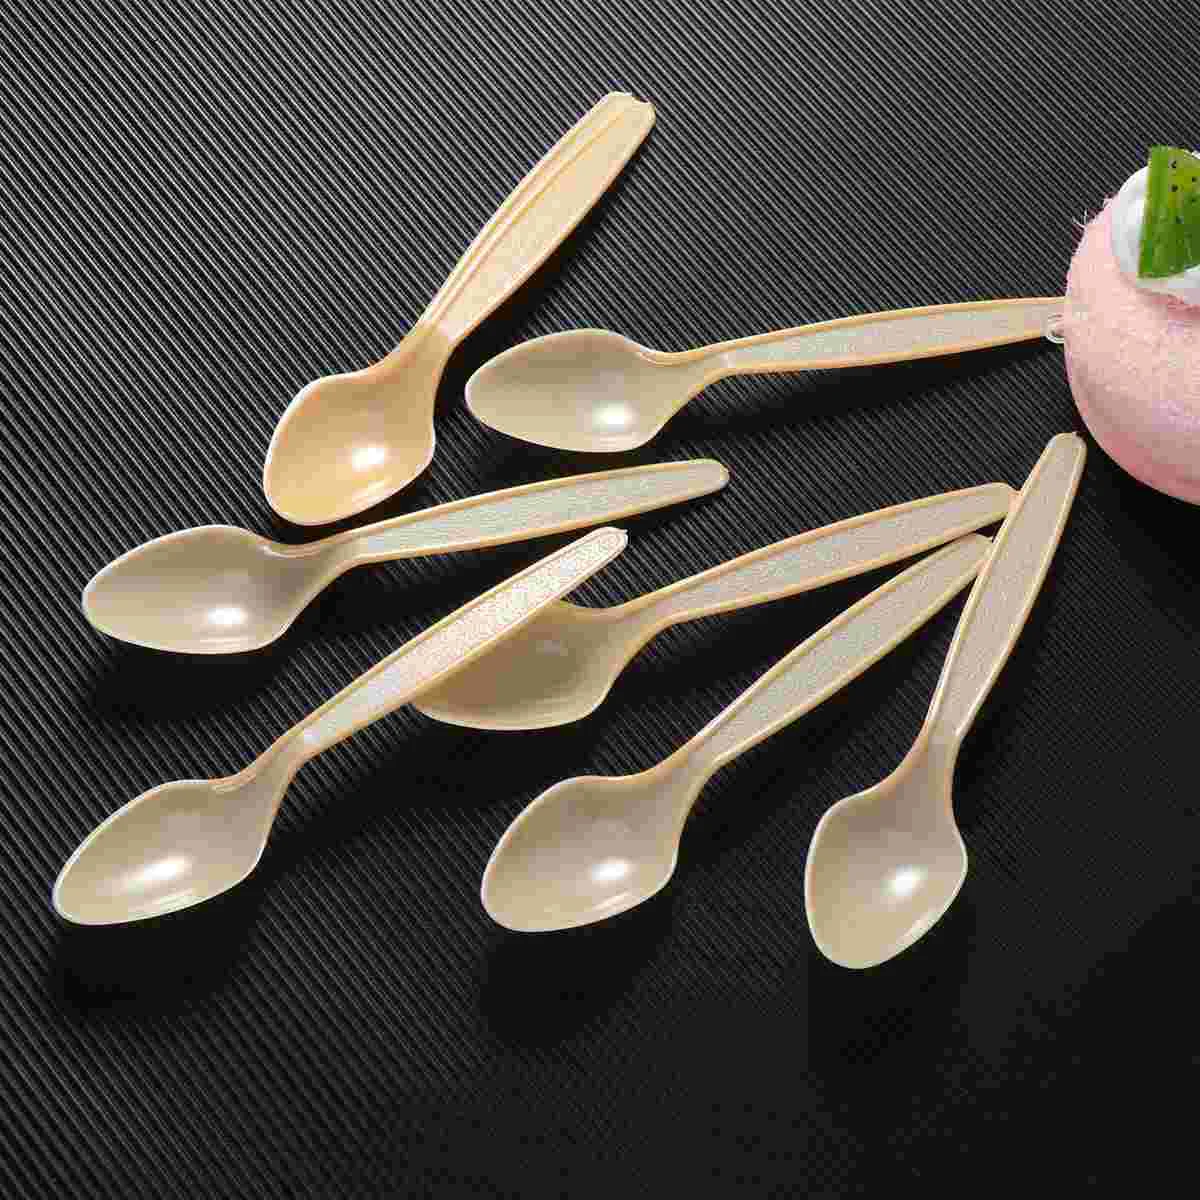 

Plastic Clear Spoons Utensils Look Mica Only Large Resistant Heat That Medium Like Wood Weight Heavyweight Flatware Inches